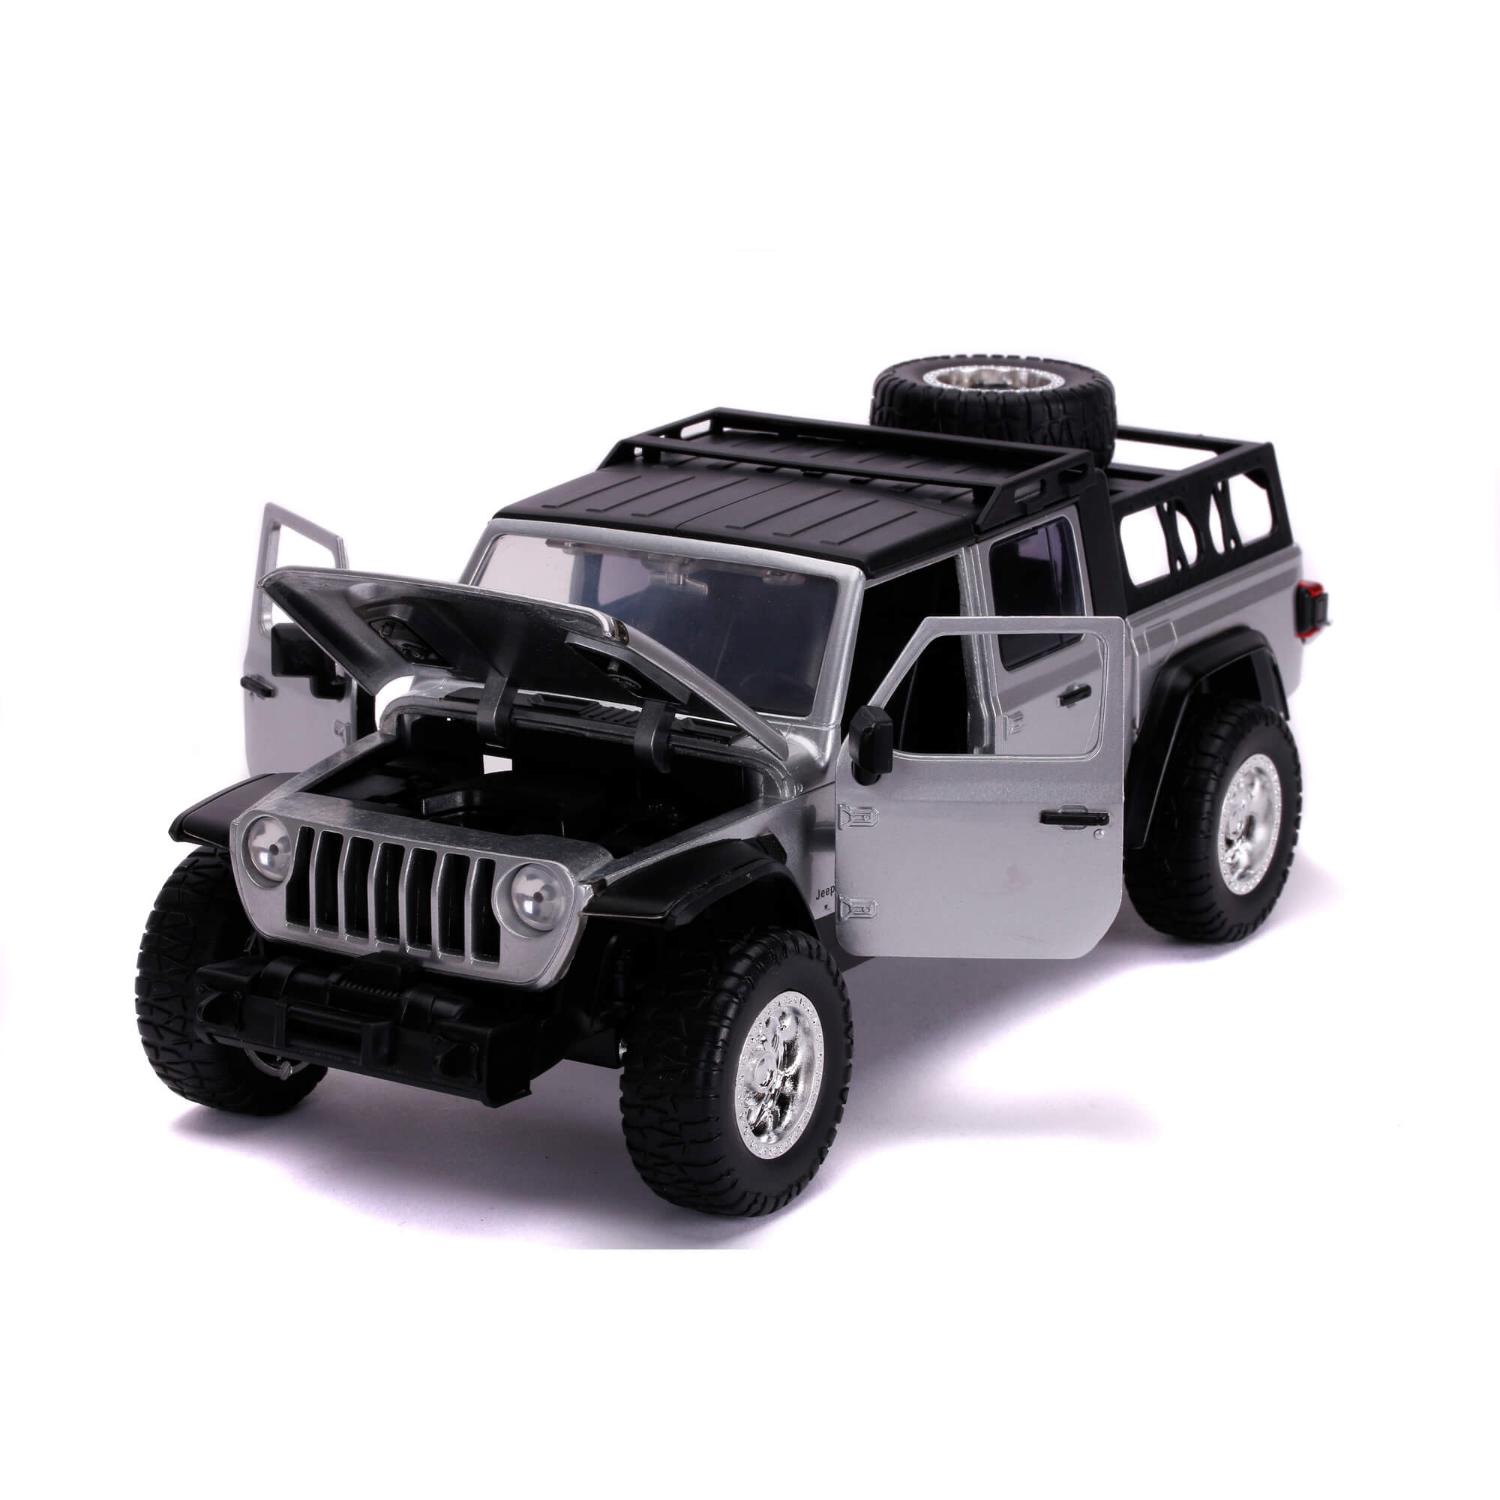 Fast and Furious 9 Jeep Gladiator 2020 in silver 1:24 scale model from Jada